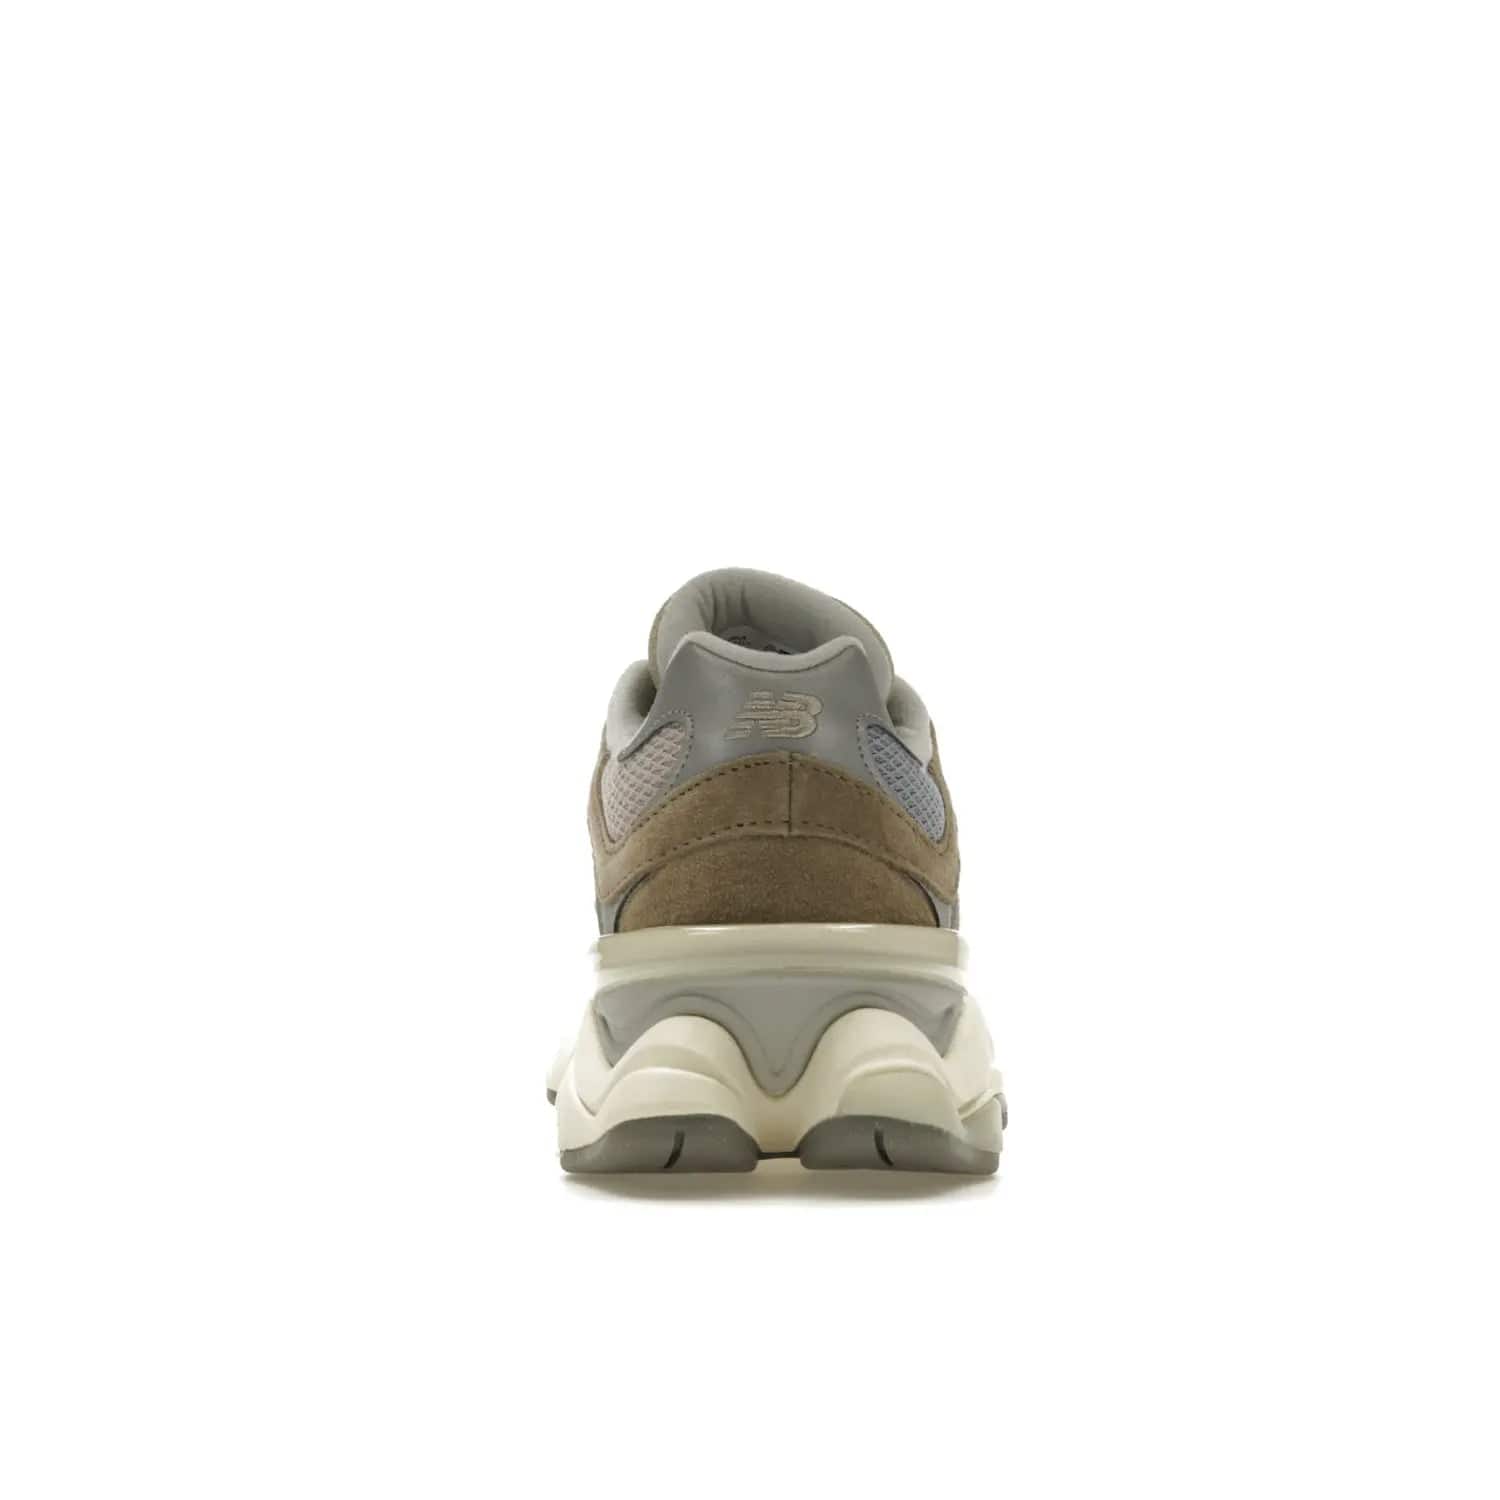 New Balance 9060 Mushroom - Image 28 - Only at www.BallersClubKickz.com - Get the New Balance 9060 Mushroom in stylish aluminum and mushroom tones. Featuring a porous mesh fabric with multiple suede overlays, a grey N symbol and rugged off-white/grey sole. Shop now and make a statement.